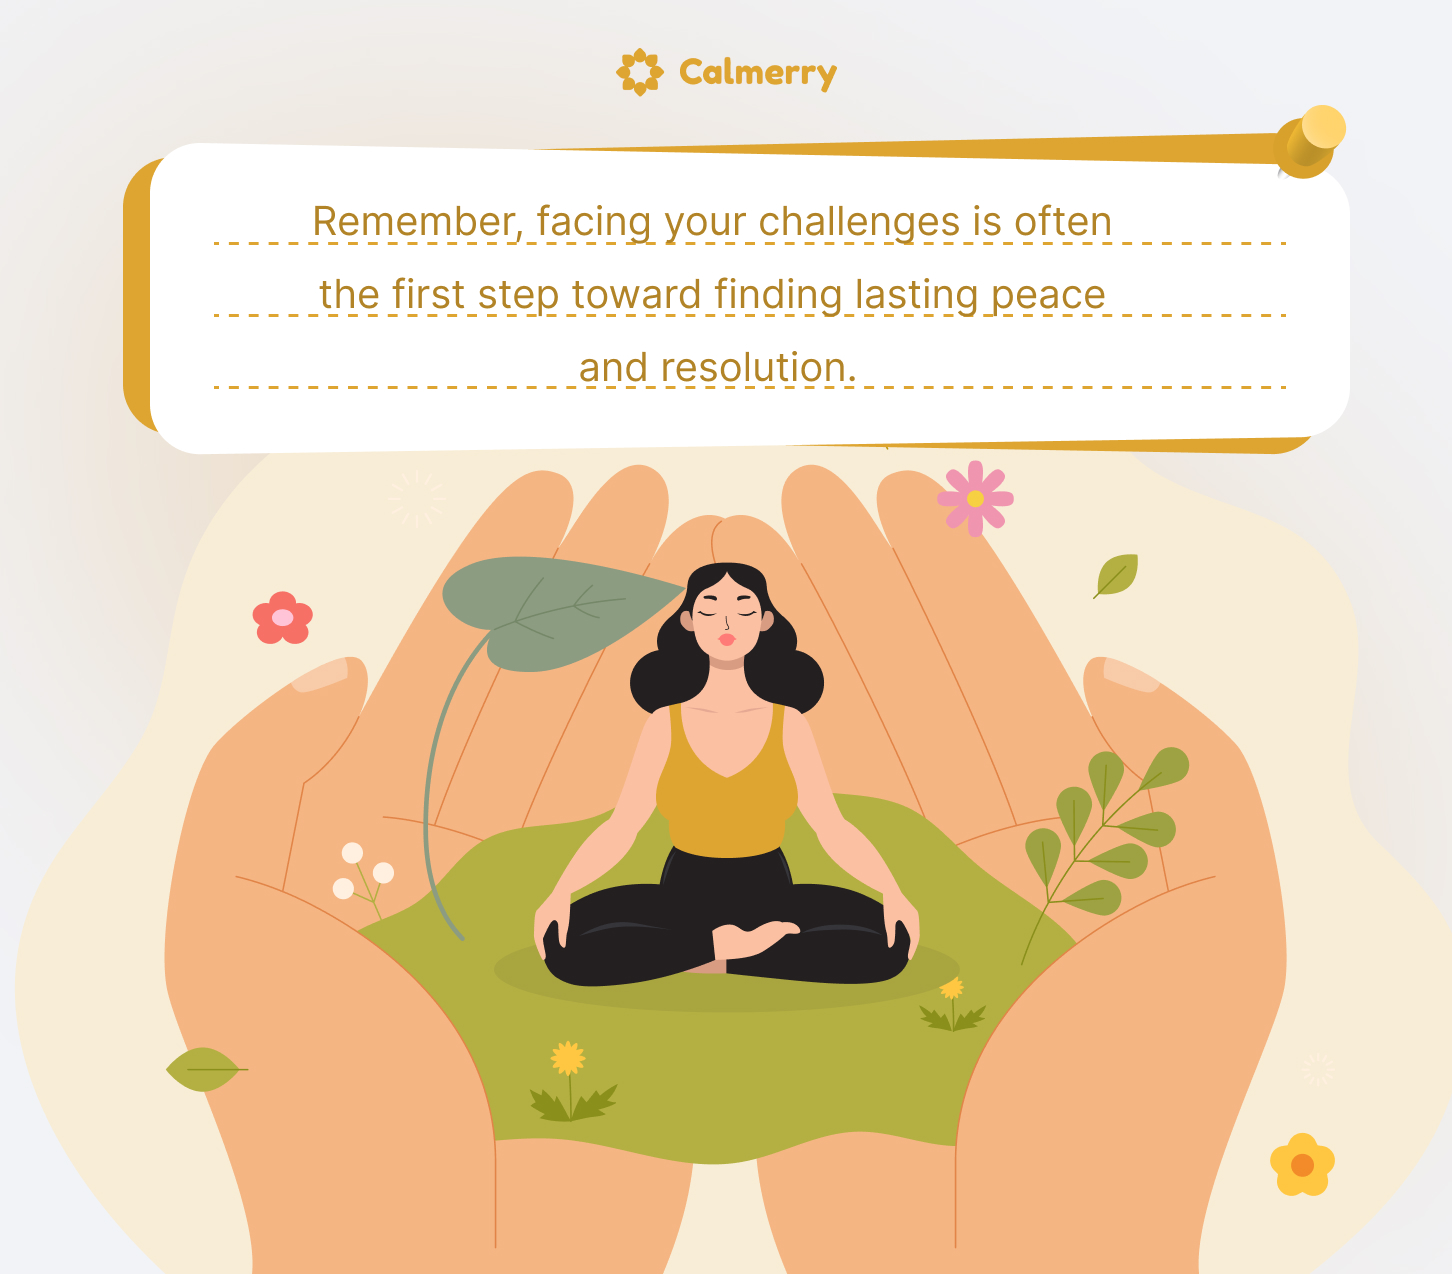 This image depicts a serene and supportive scene related to mindfulness and mental health. The central figure is a woman sitting in a meditation pose on a green surface, surrounded by plants and flowers. She is cradled in a pair of large, nurturing hands, symbolizing support and protection.
Above the scene is a text box with an inspirational message: "Remember, facing your challenges is often the first step toward finding lasting peace and resolution."
The image is branded with "Calmerry" at the top, suggesting it's associated with a mental health or wellness service. The overall composition conveys a sense of peace, growth, and the importance of self-care and facing one's challenges with support.